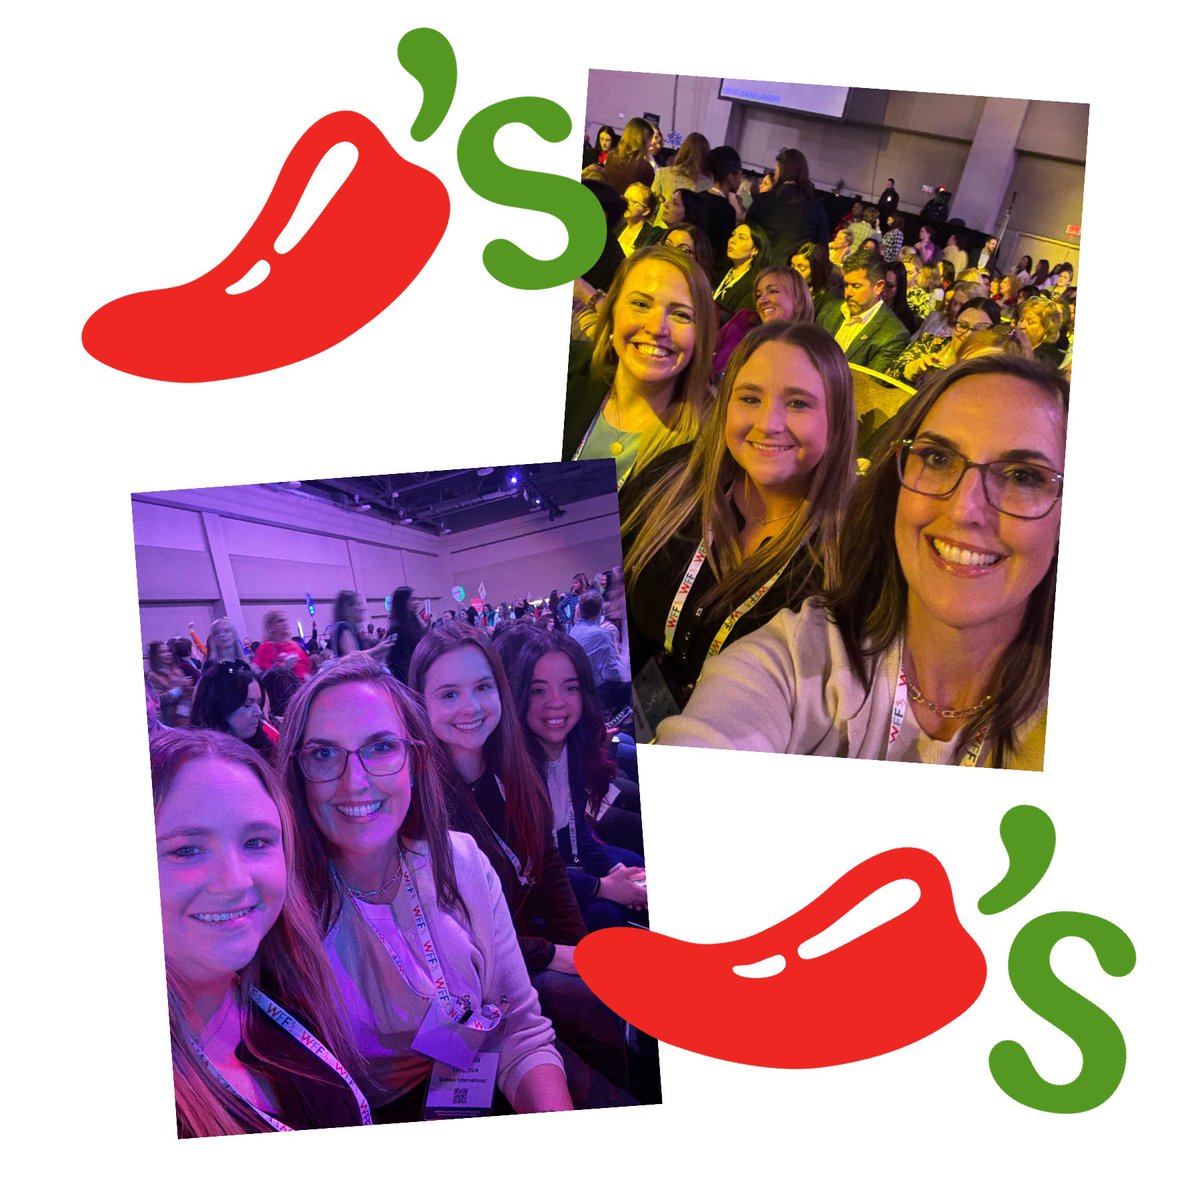 #WFFLimitless #ChilisLove Everywhere I turn there is just awesomeness 🙌🏼🌶❤️Look at these powerful leaders and our allies getting stronger together!